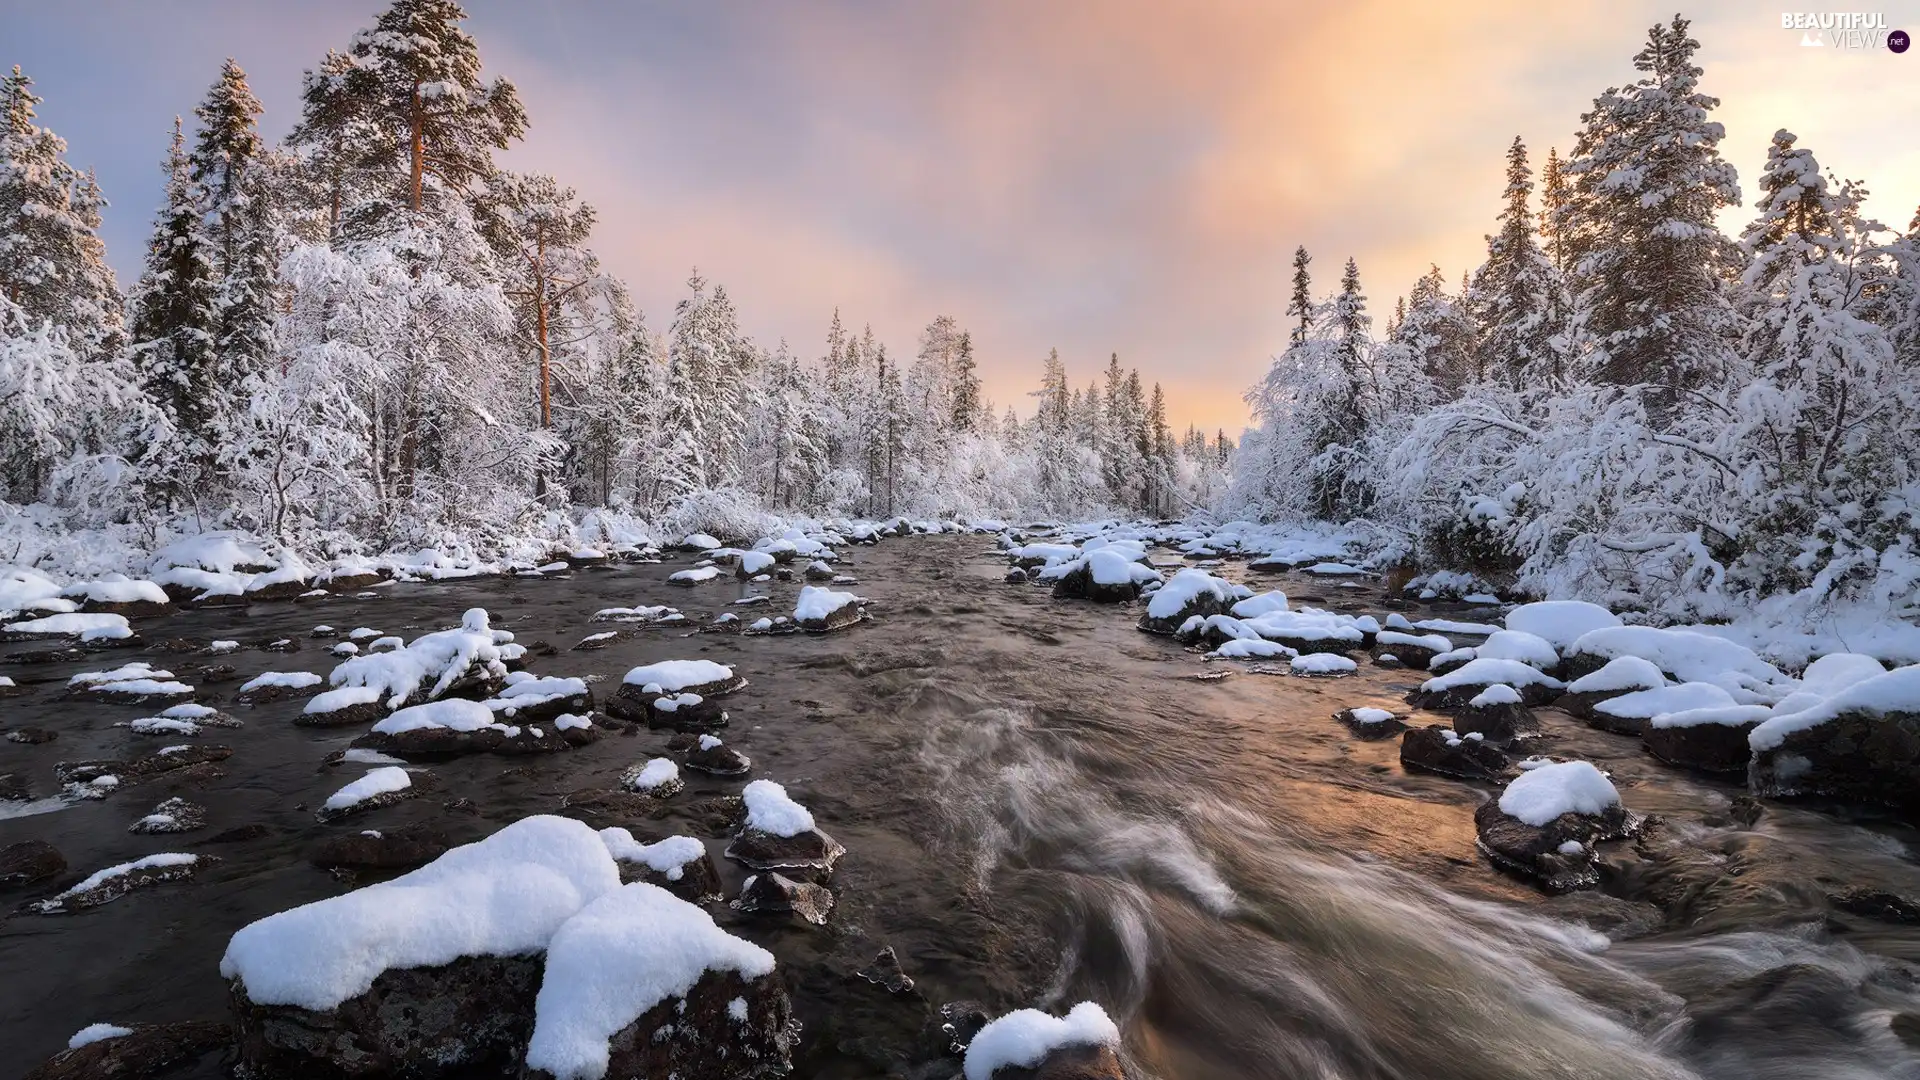 River, forest, trees, snow, winter, Snowy, viewes